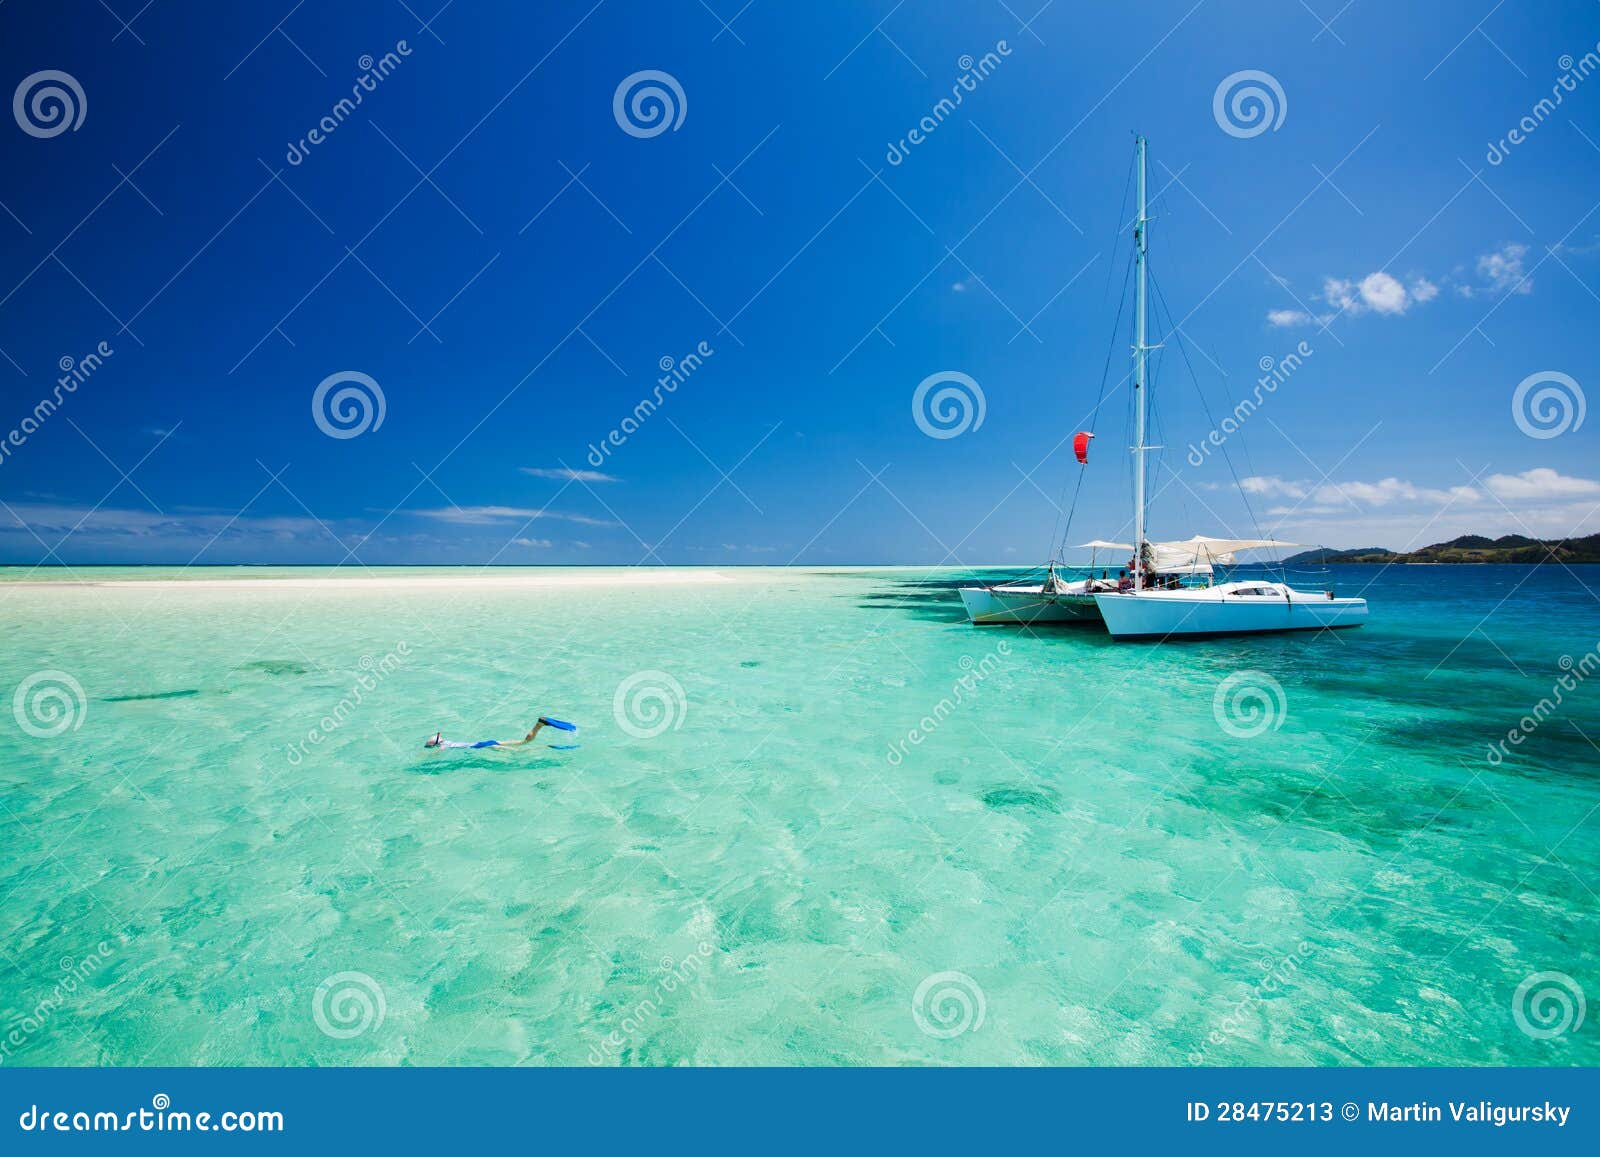  In Shallow Water Off The Catamaran Stock Photos - Image: 28475213